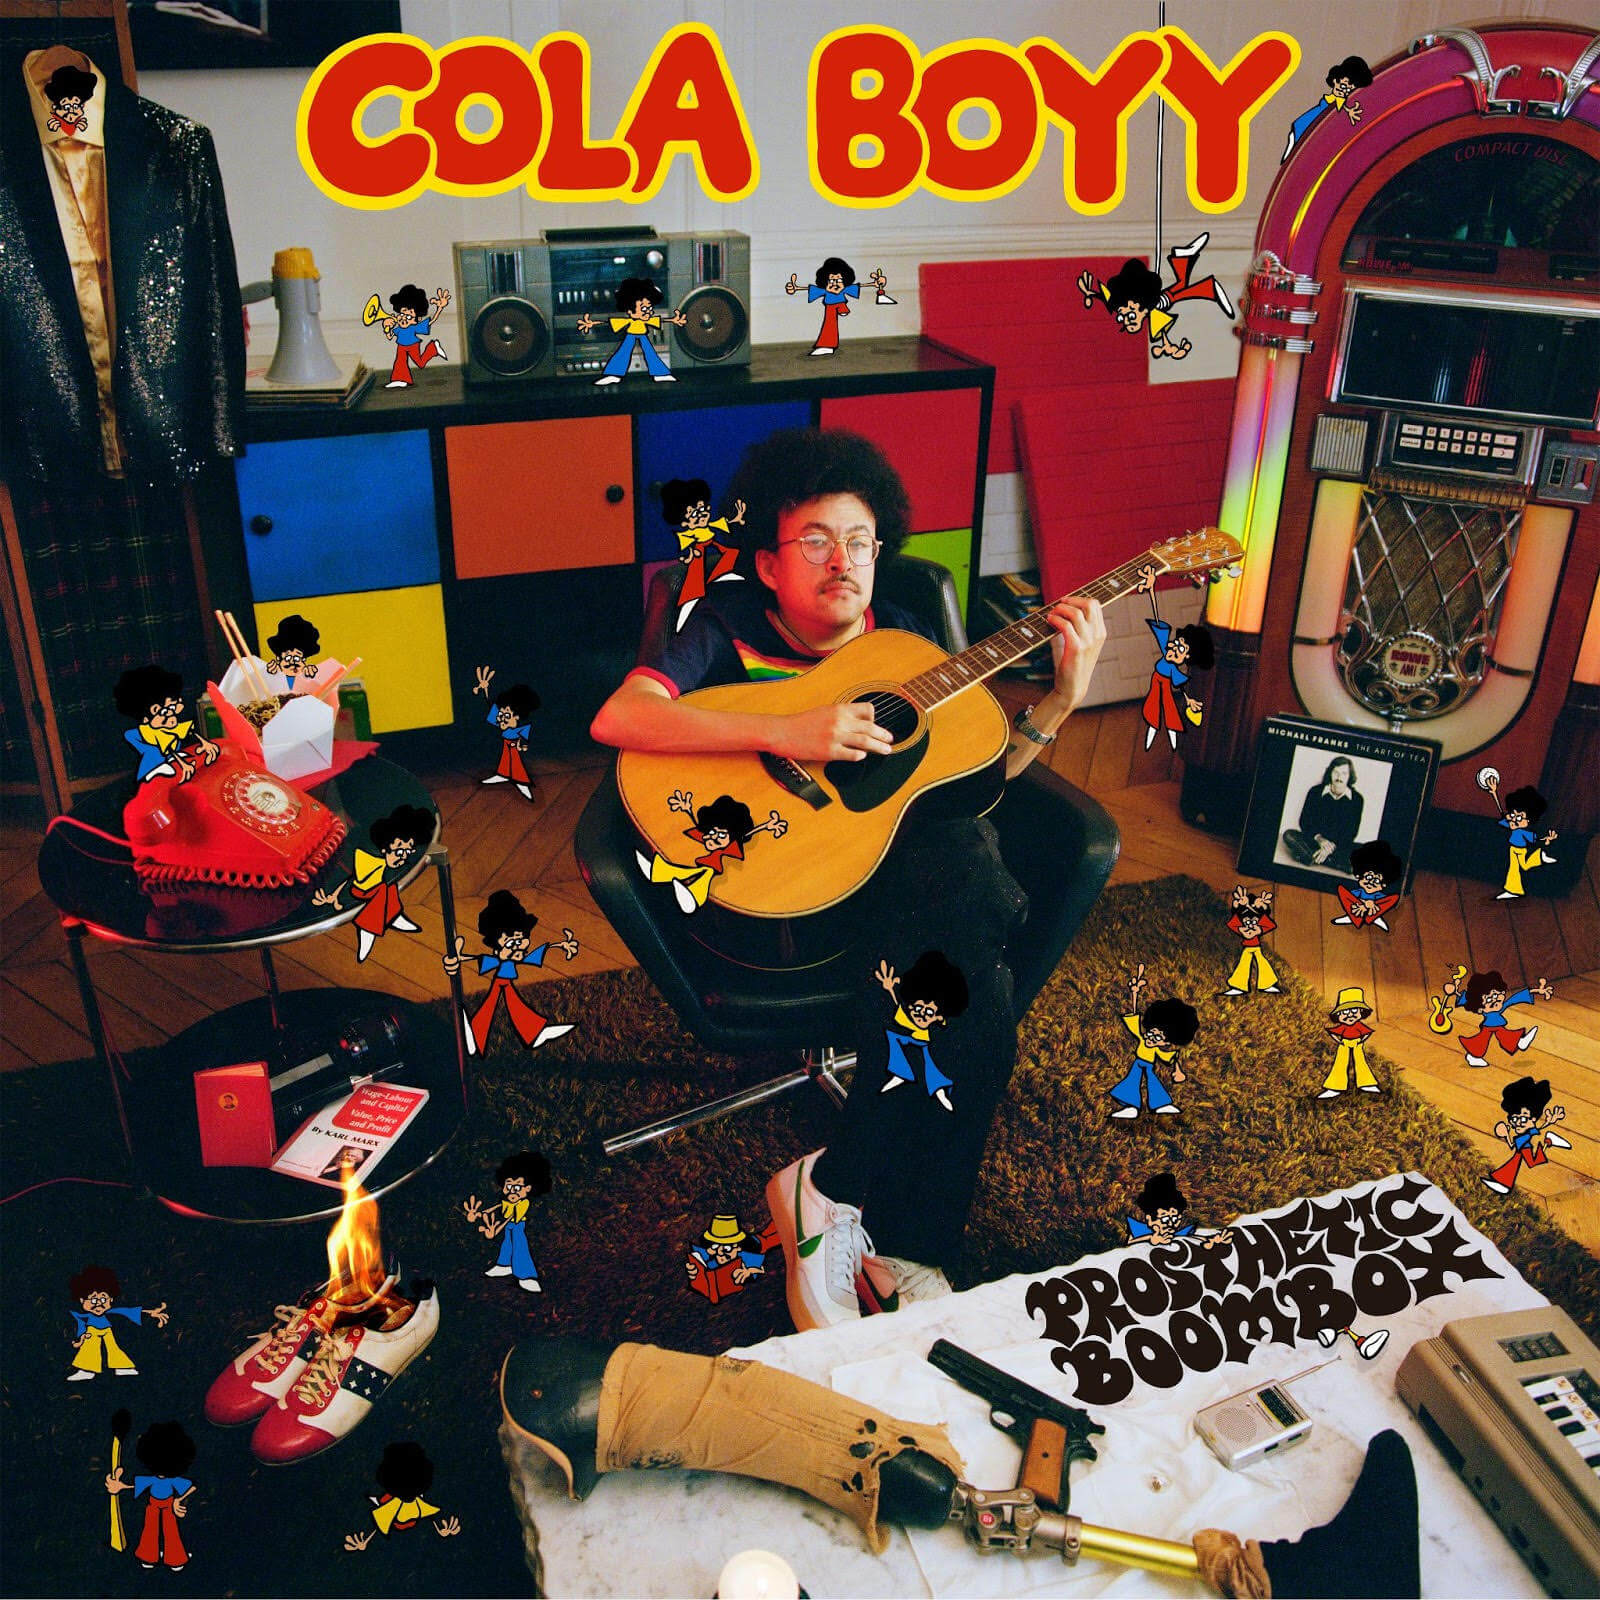 Prosthetic Boombox by Cola Boyy album review by Adam Fink. The full-length is out today, via MGMT Records/Record Makers